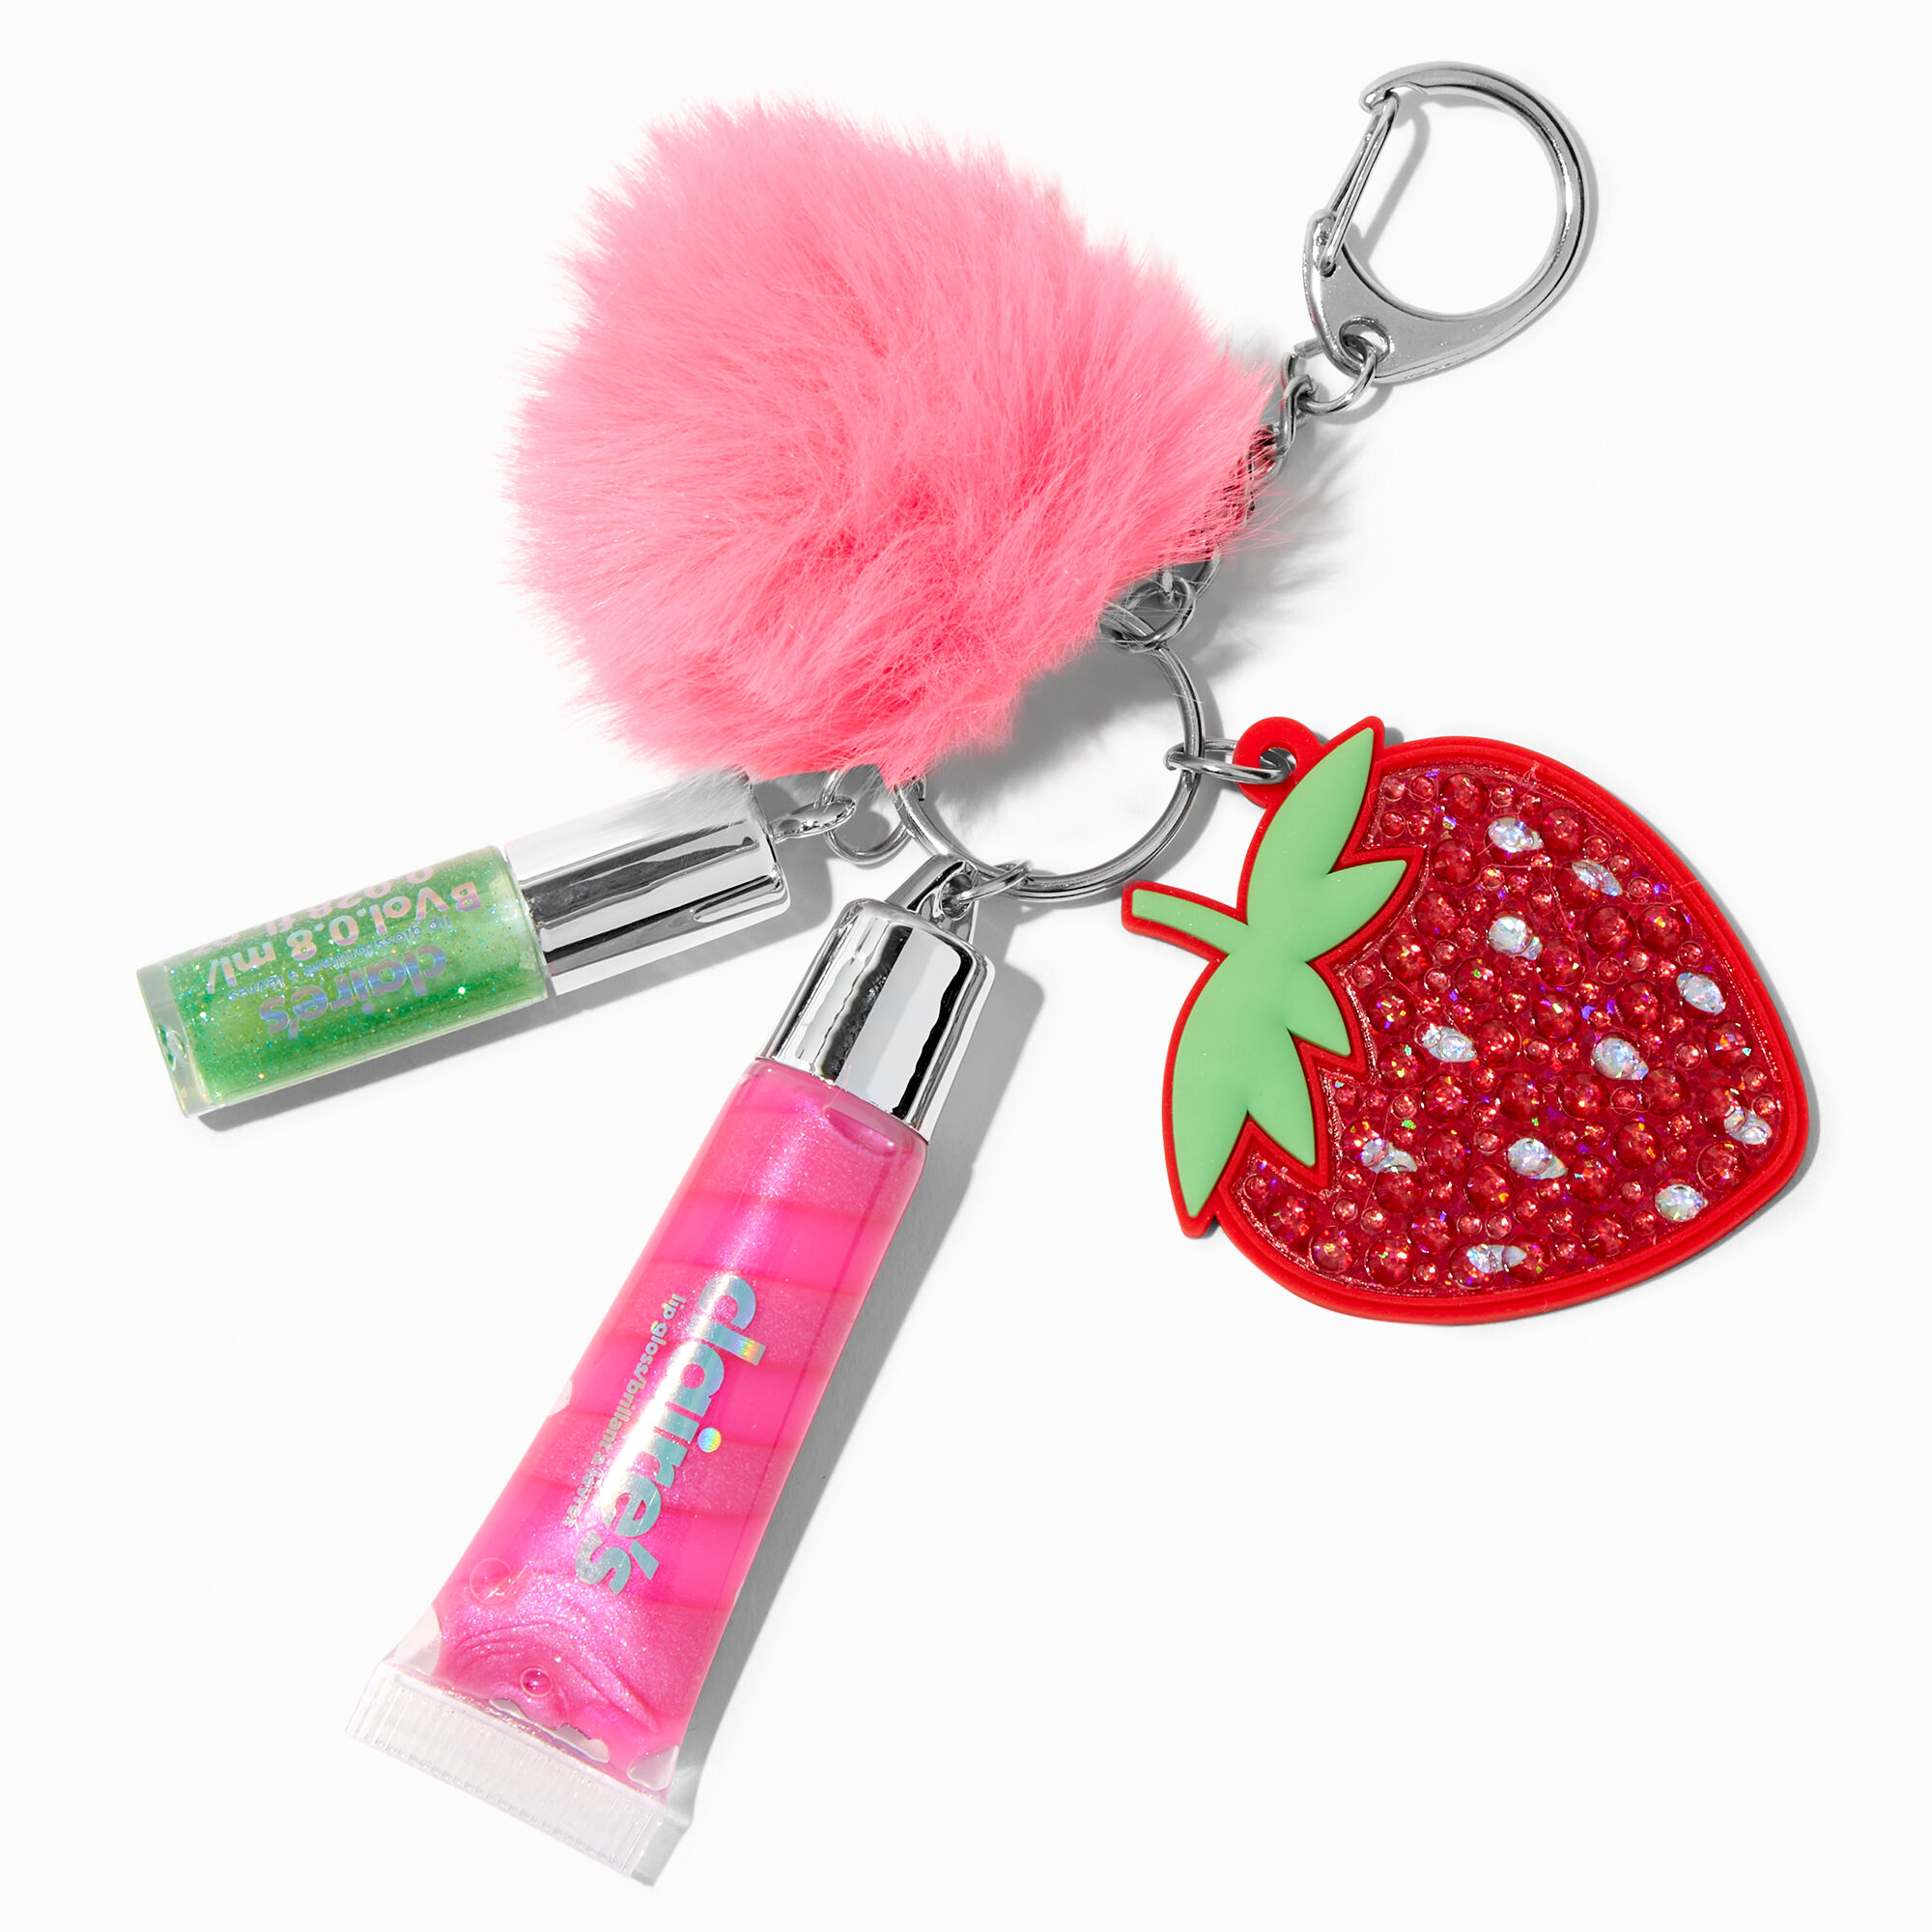 Almar Strawberry Shimmer Lip Gloss Key Chain Set | Best Price and Reviews |  Zulily